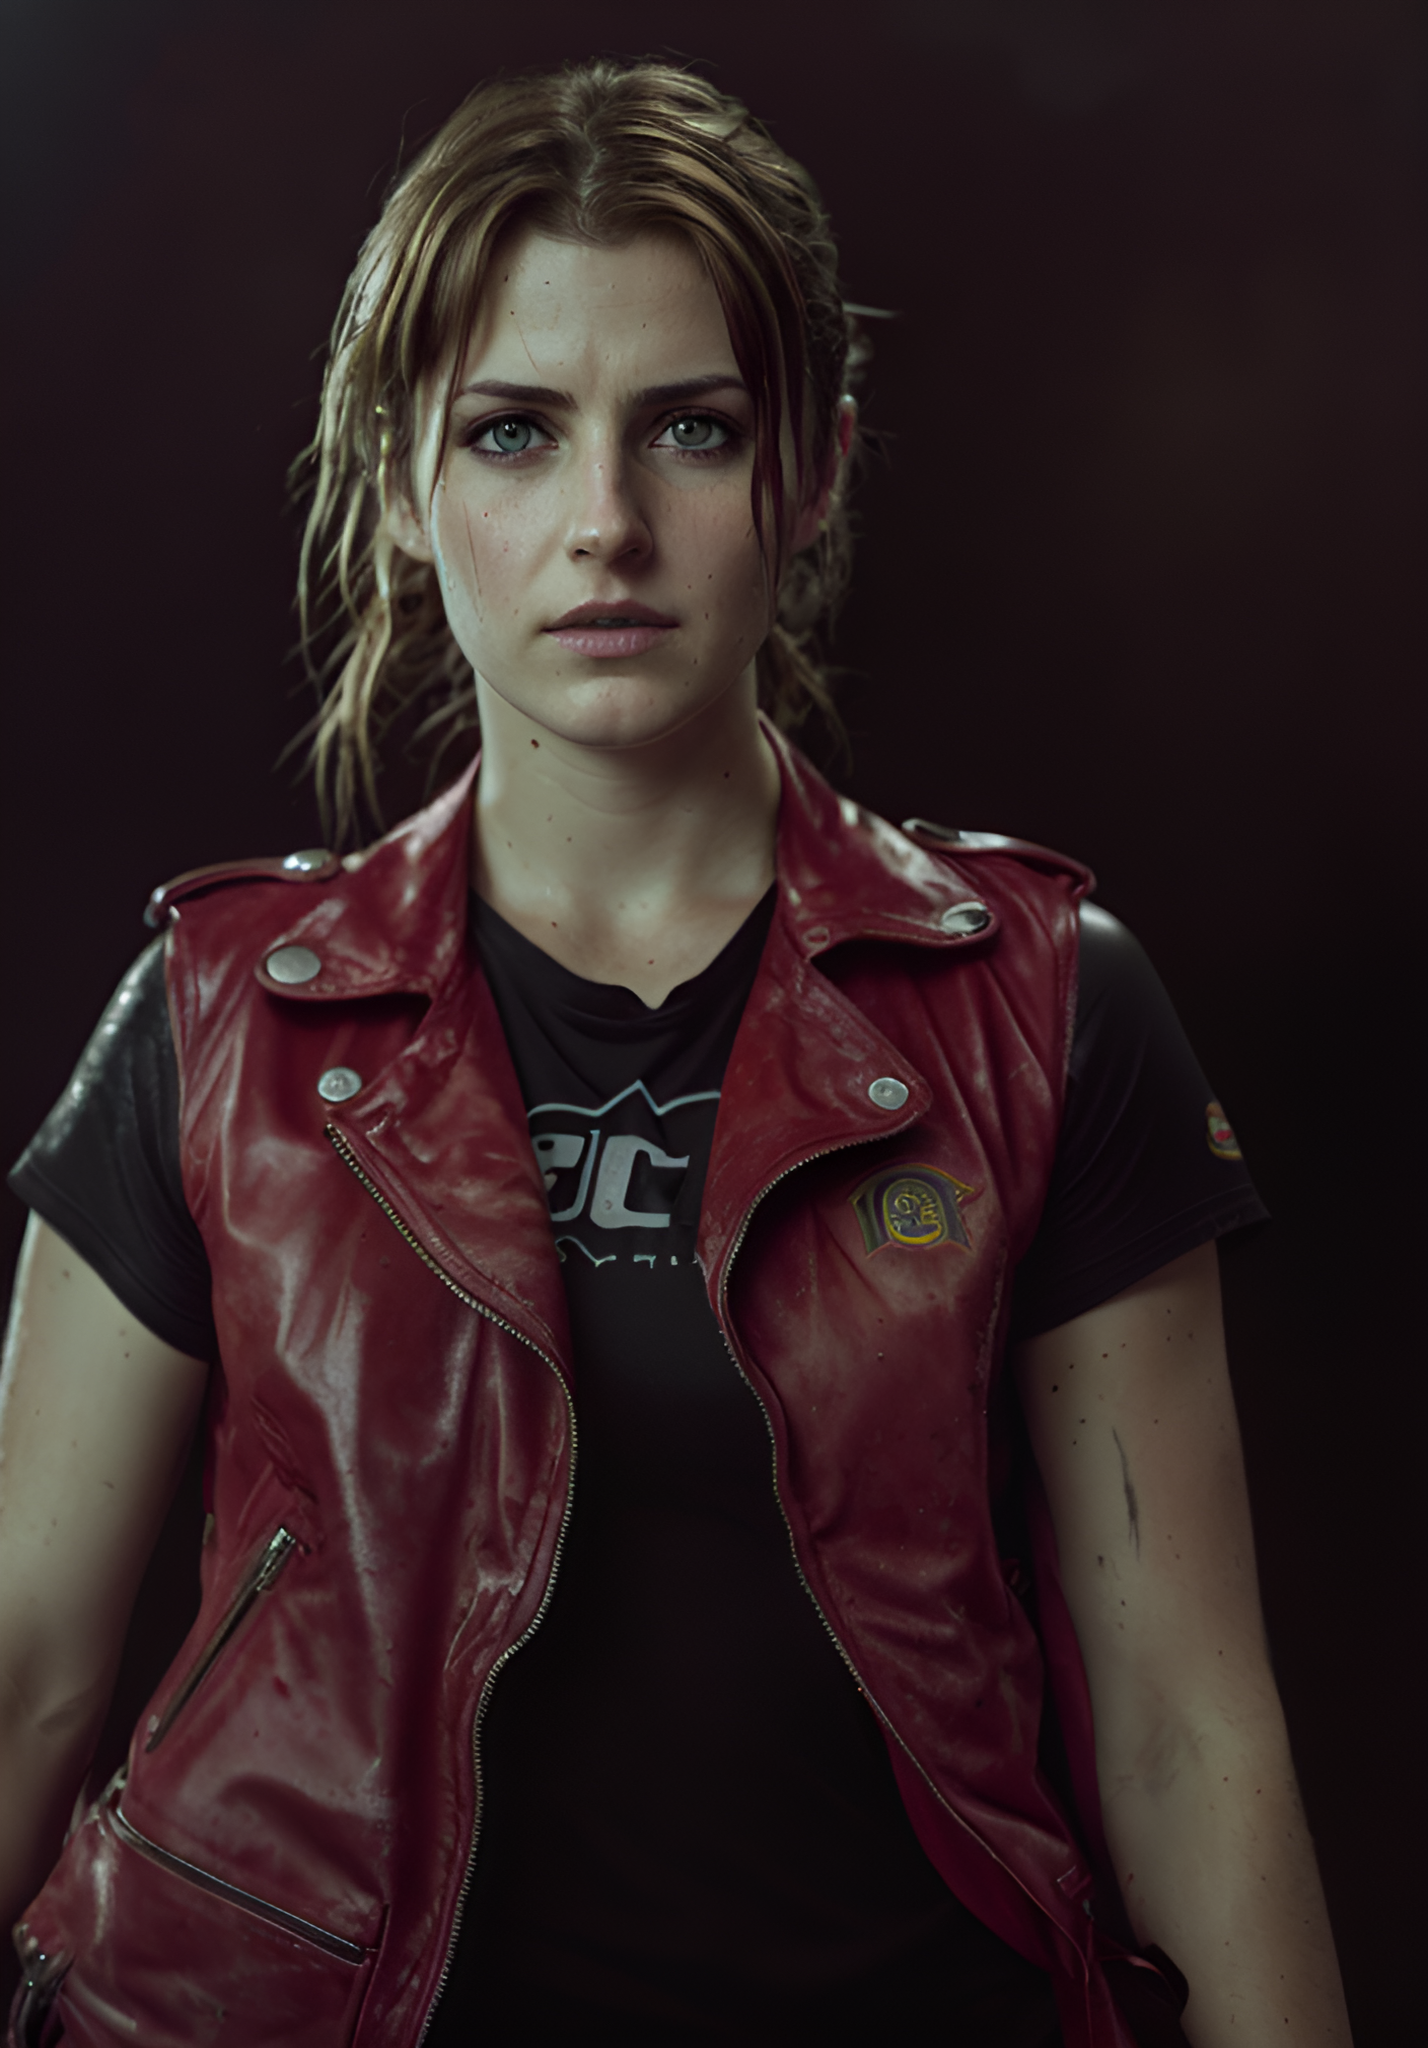 Claire RedField (Resident Evil 2 Remake) by semsei on DeviantArt